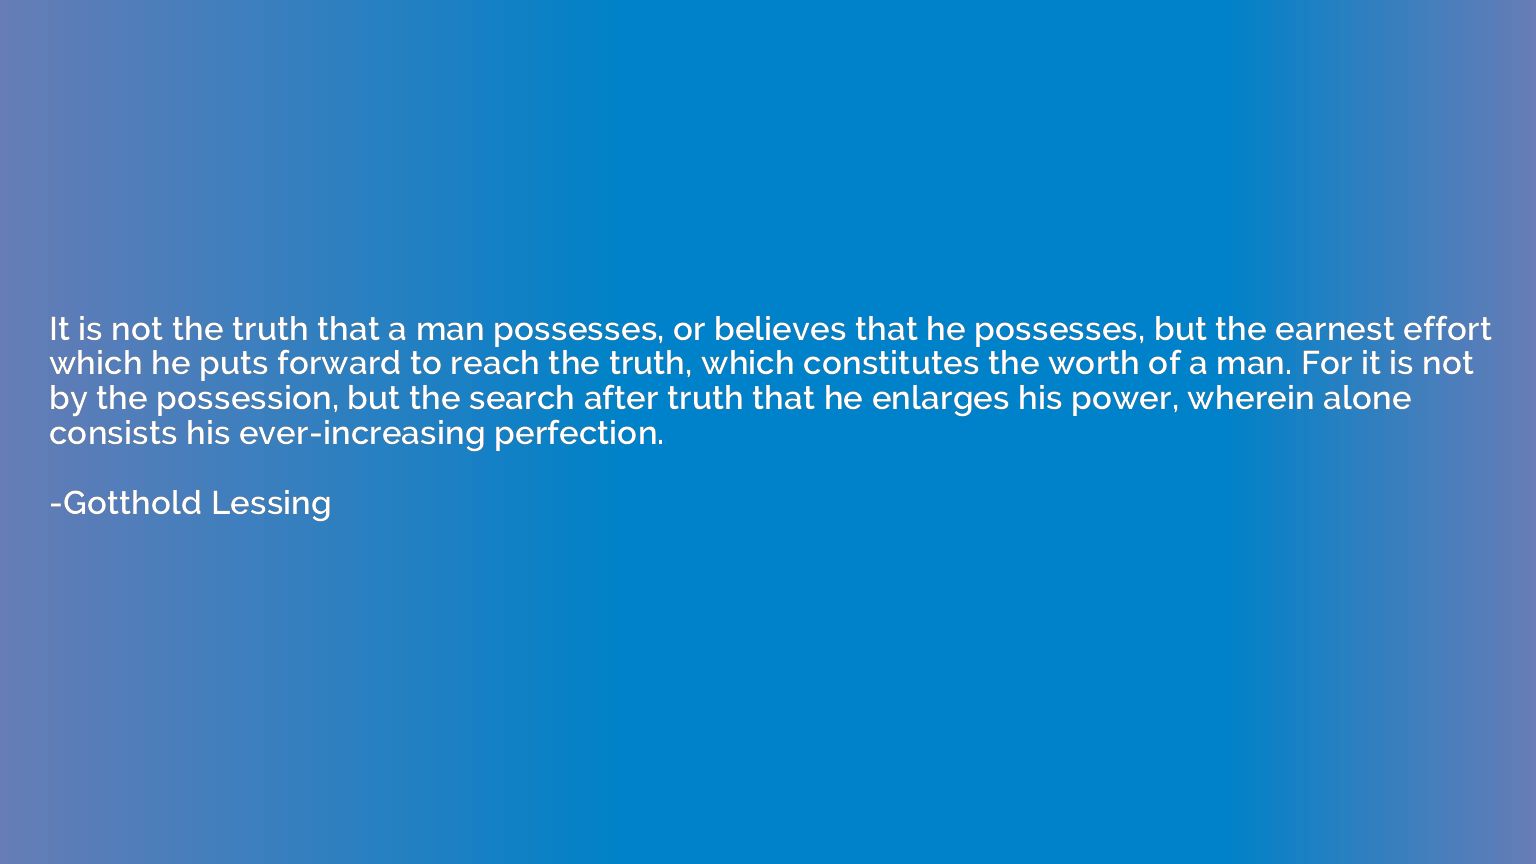 It is not the truth that a man possesses, or believes that h